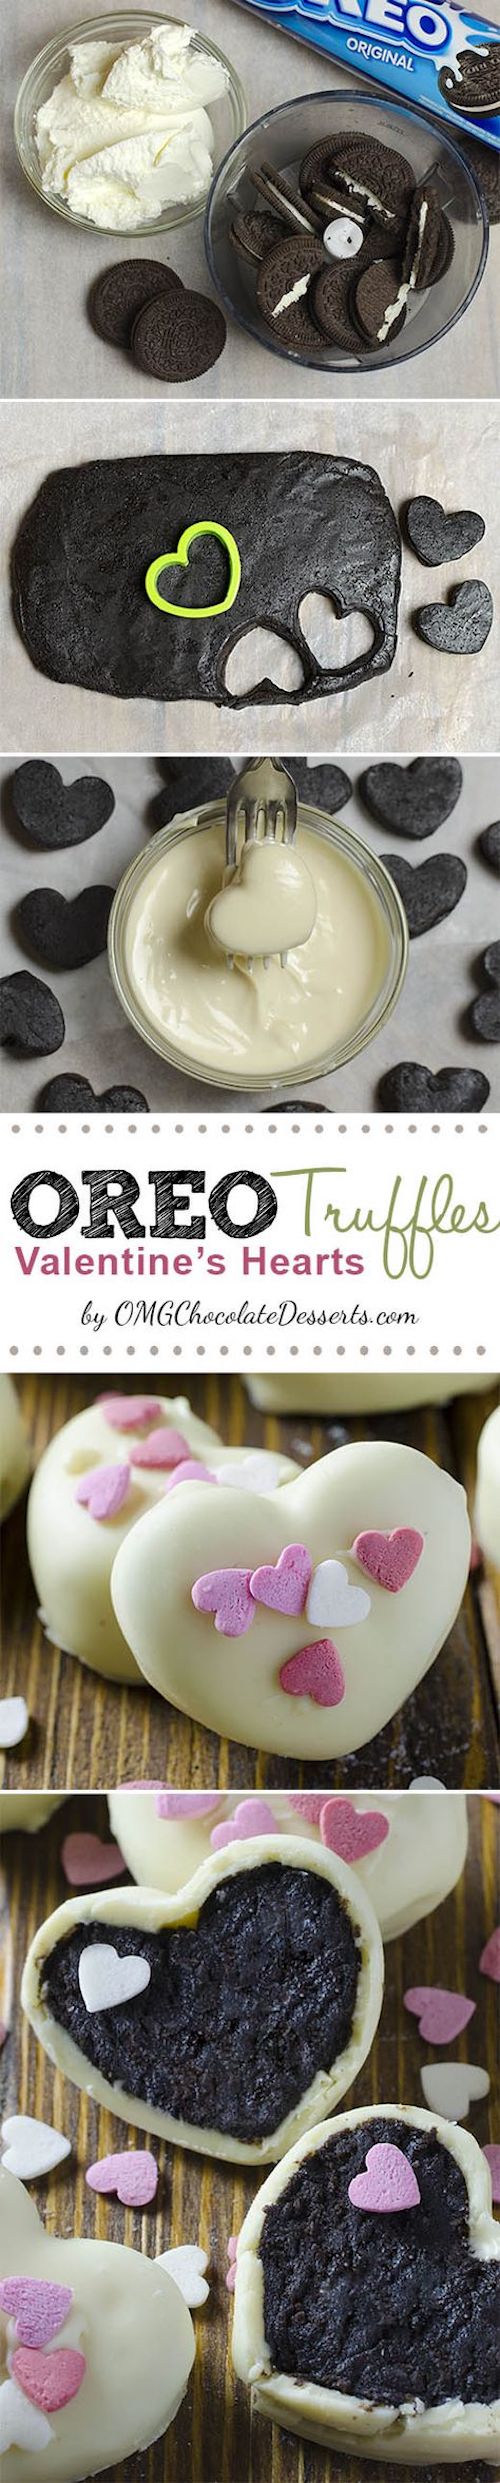 These are 3 ingredient heart shaped Oreo Cream Cheese Truffles covered with white chocolate, perfect for Valentine's Day